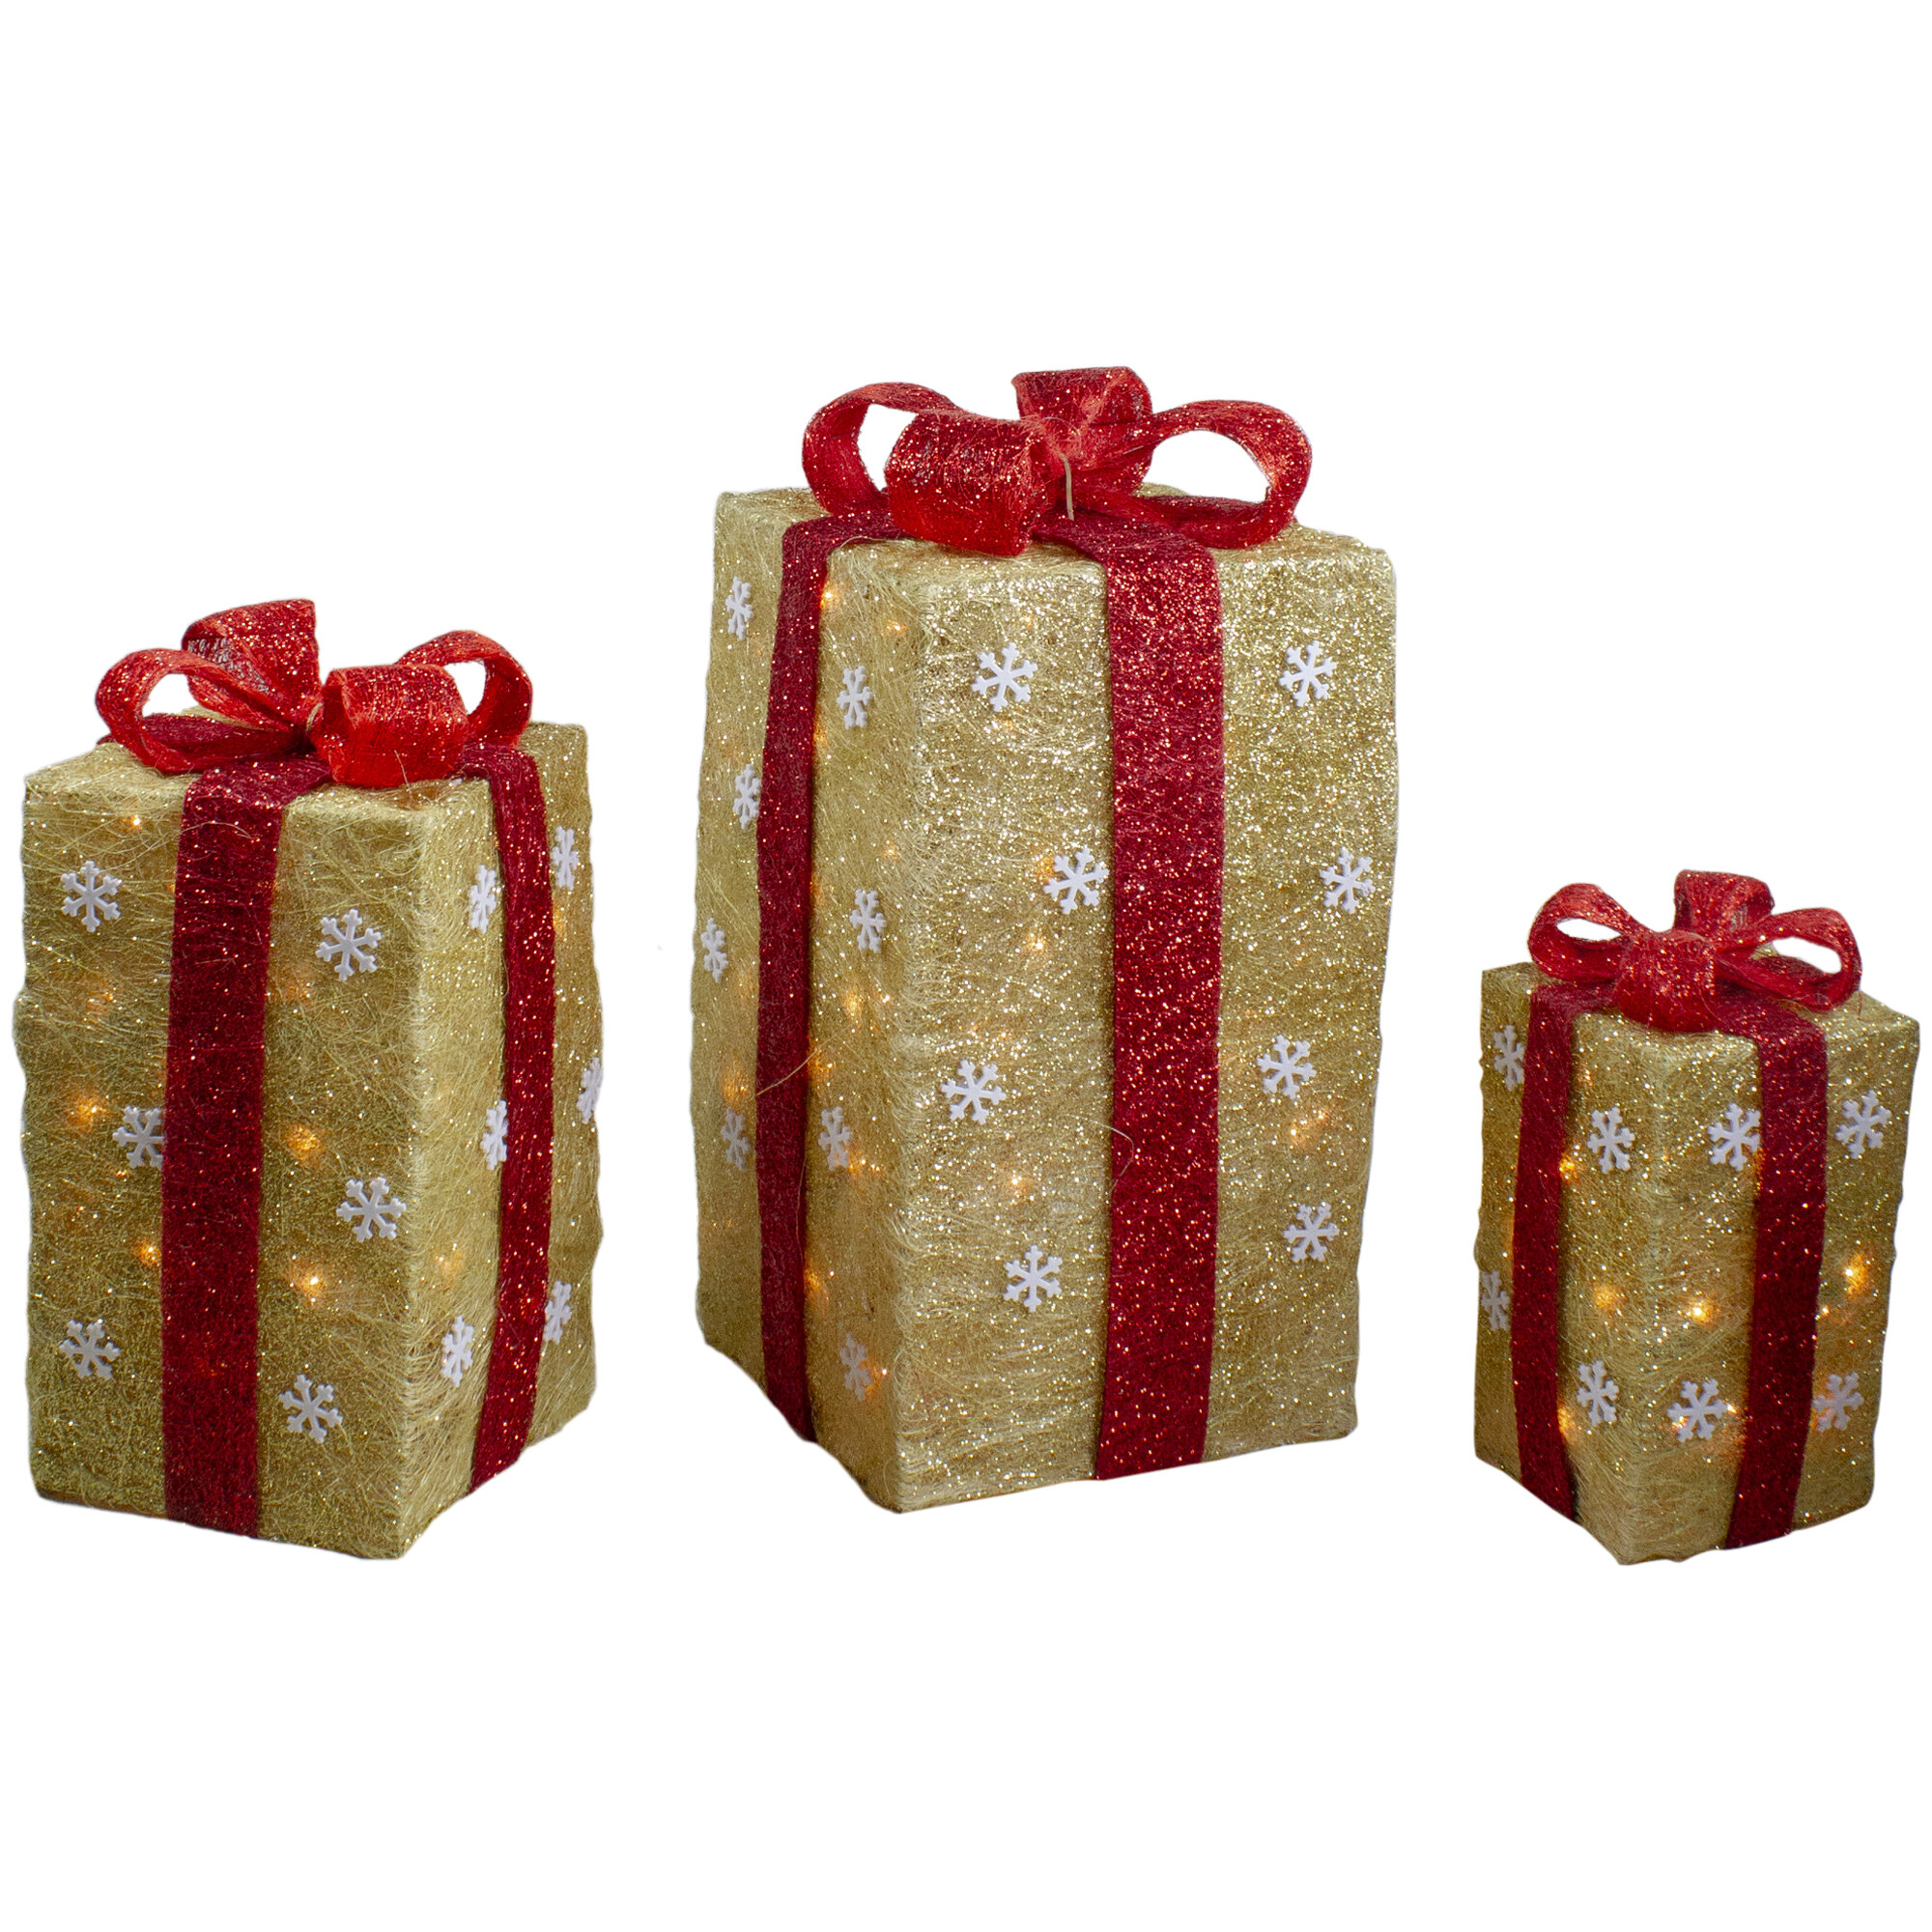 Coolection Of Gold Bows For Present Box Gold Decorative Bows